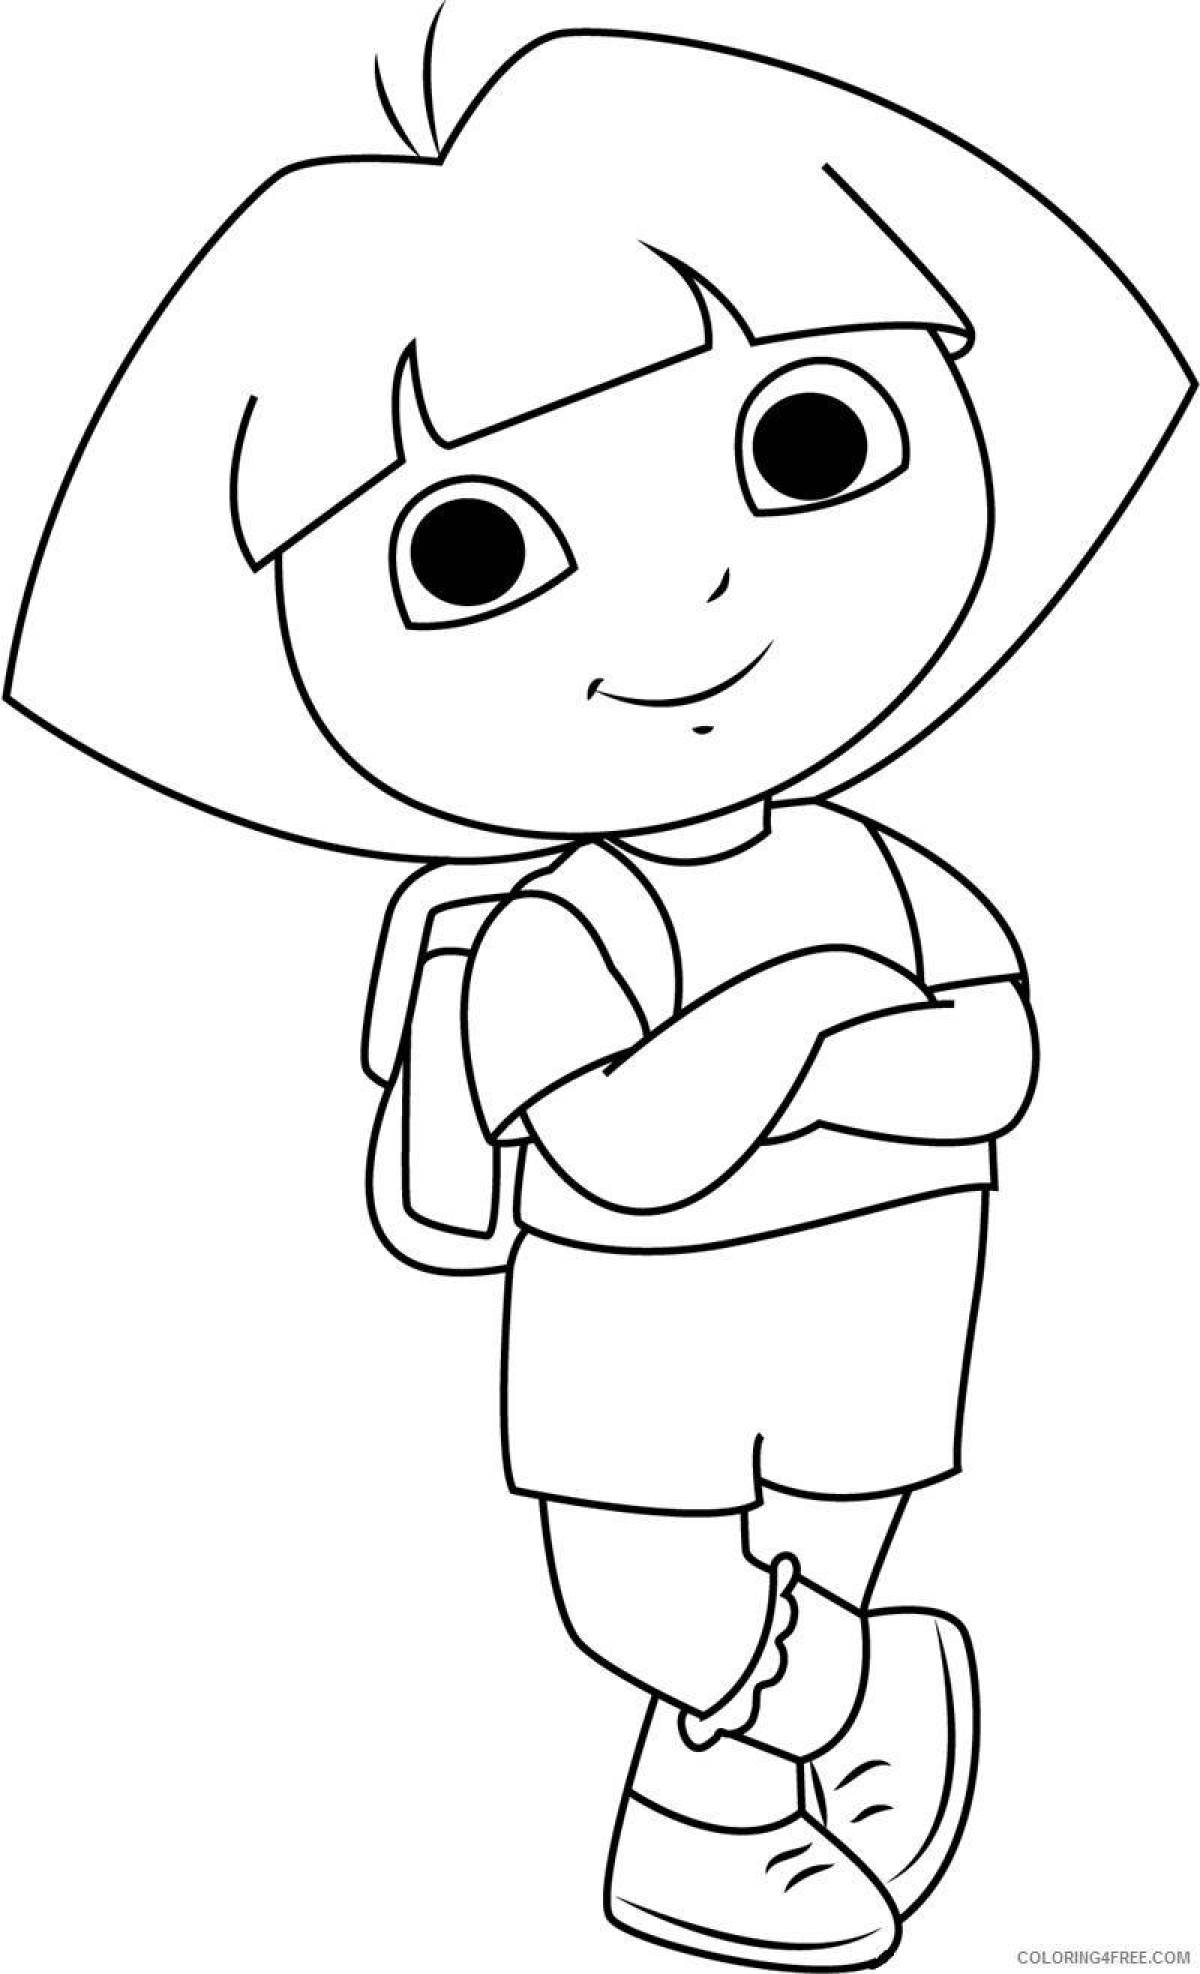 Coloring page holiday dora the singer